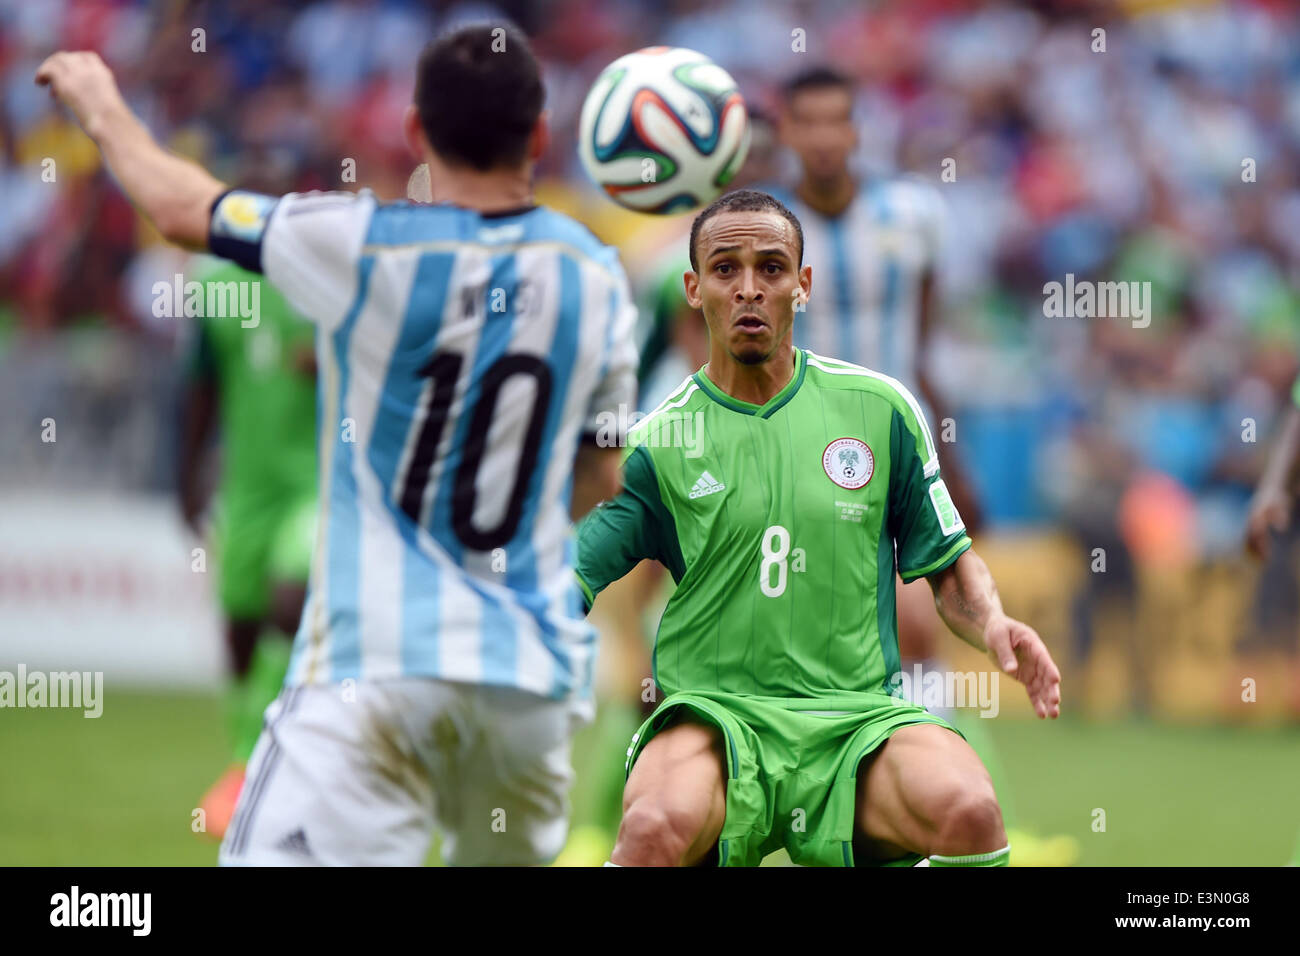 Porto Alegre, Brazil. 25th June, 2014. PORTO ALEGRE BRAZIL -15 Jun: Leo Messi and Peter Odemwingie in the match between Argentina and Nigeria, corresponding to the group F of the World Cup 2014, played at the Beira Rio stadium, on June 25, 2014. Photo: Edu Andrade/Urbanandsport/Nurphoto Credit:  Edu Andrade/NurPhoto/ZUMAPRESS.com/Alamy Live News Stock Photo